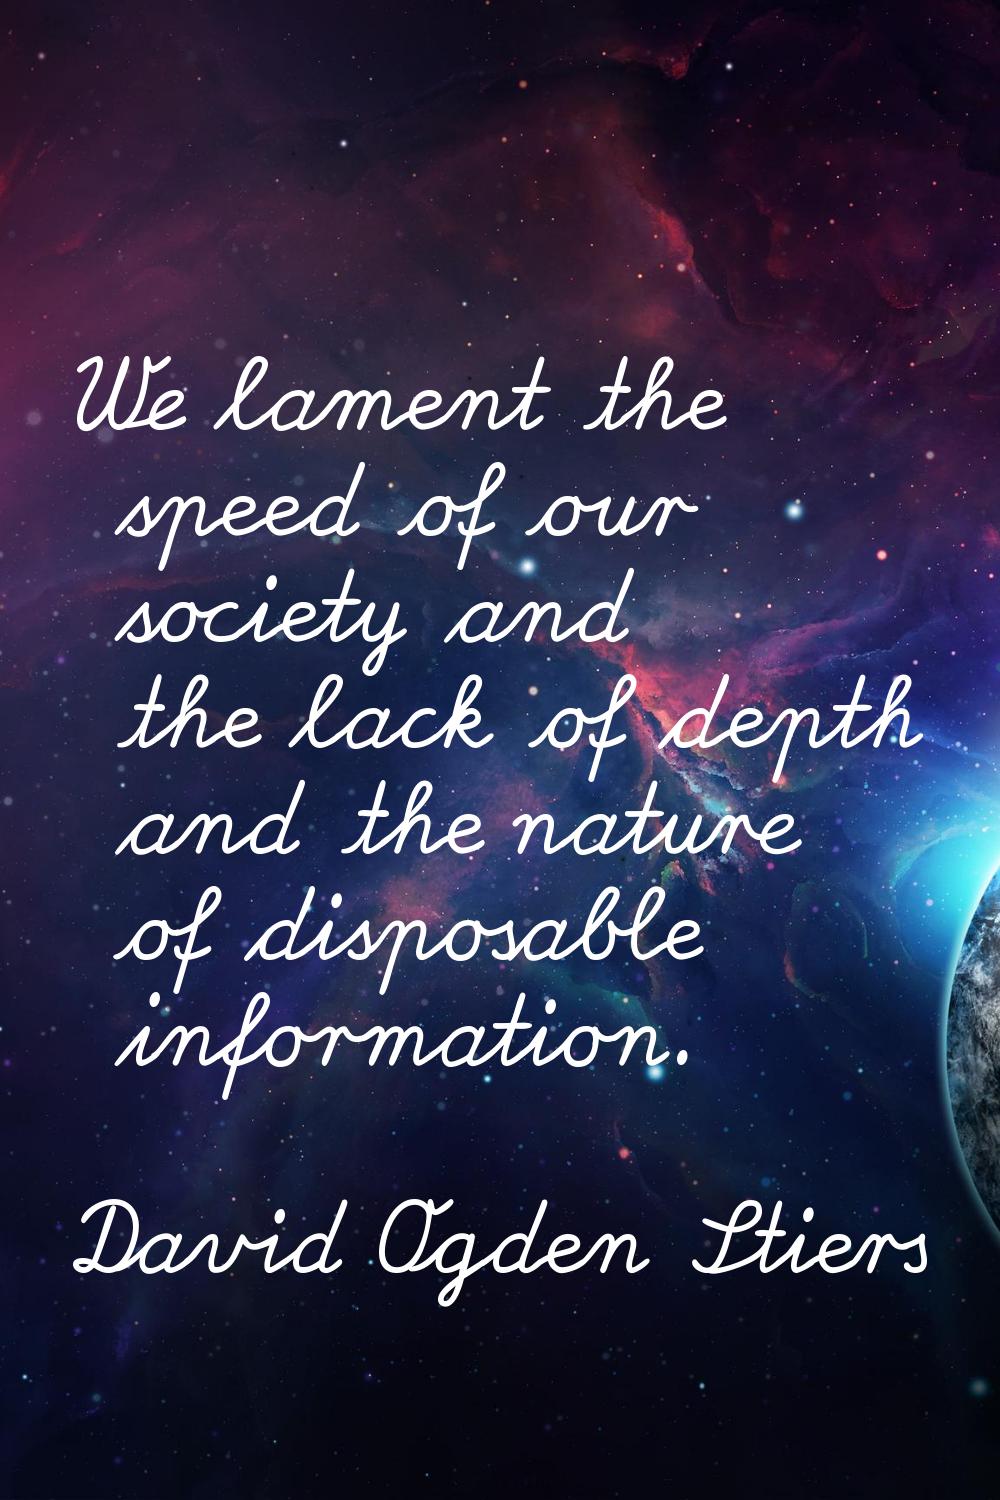 We lament the speed of our society and the lack of depth and the nature of disposable information.